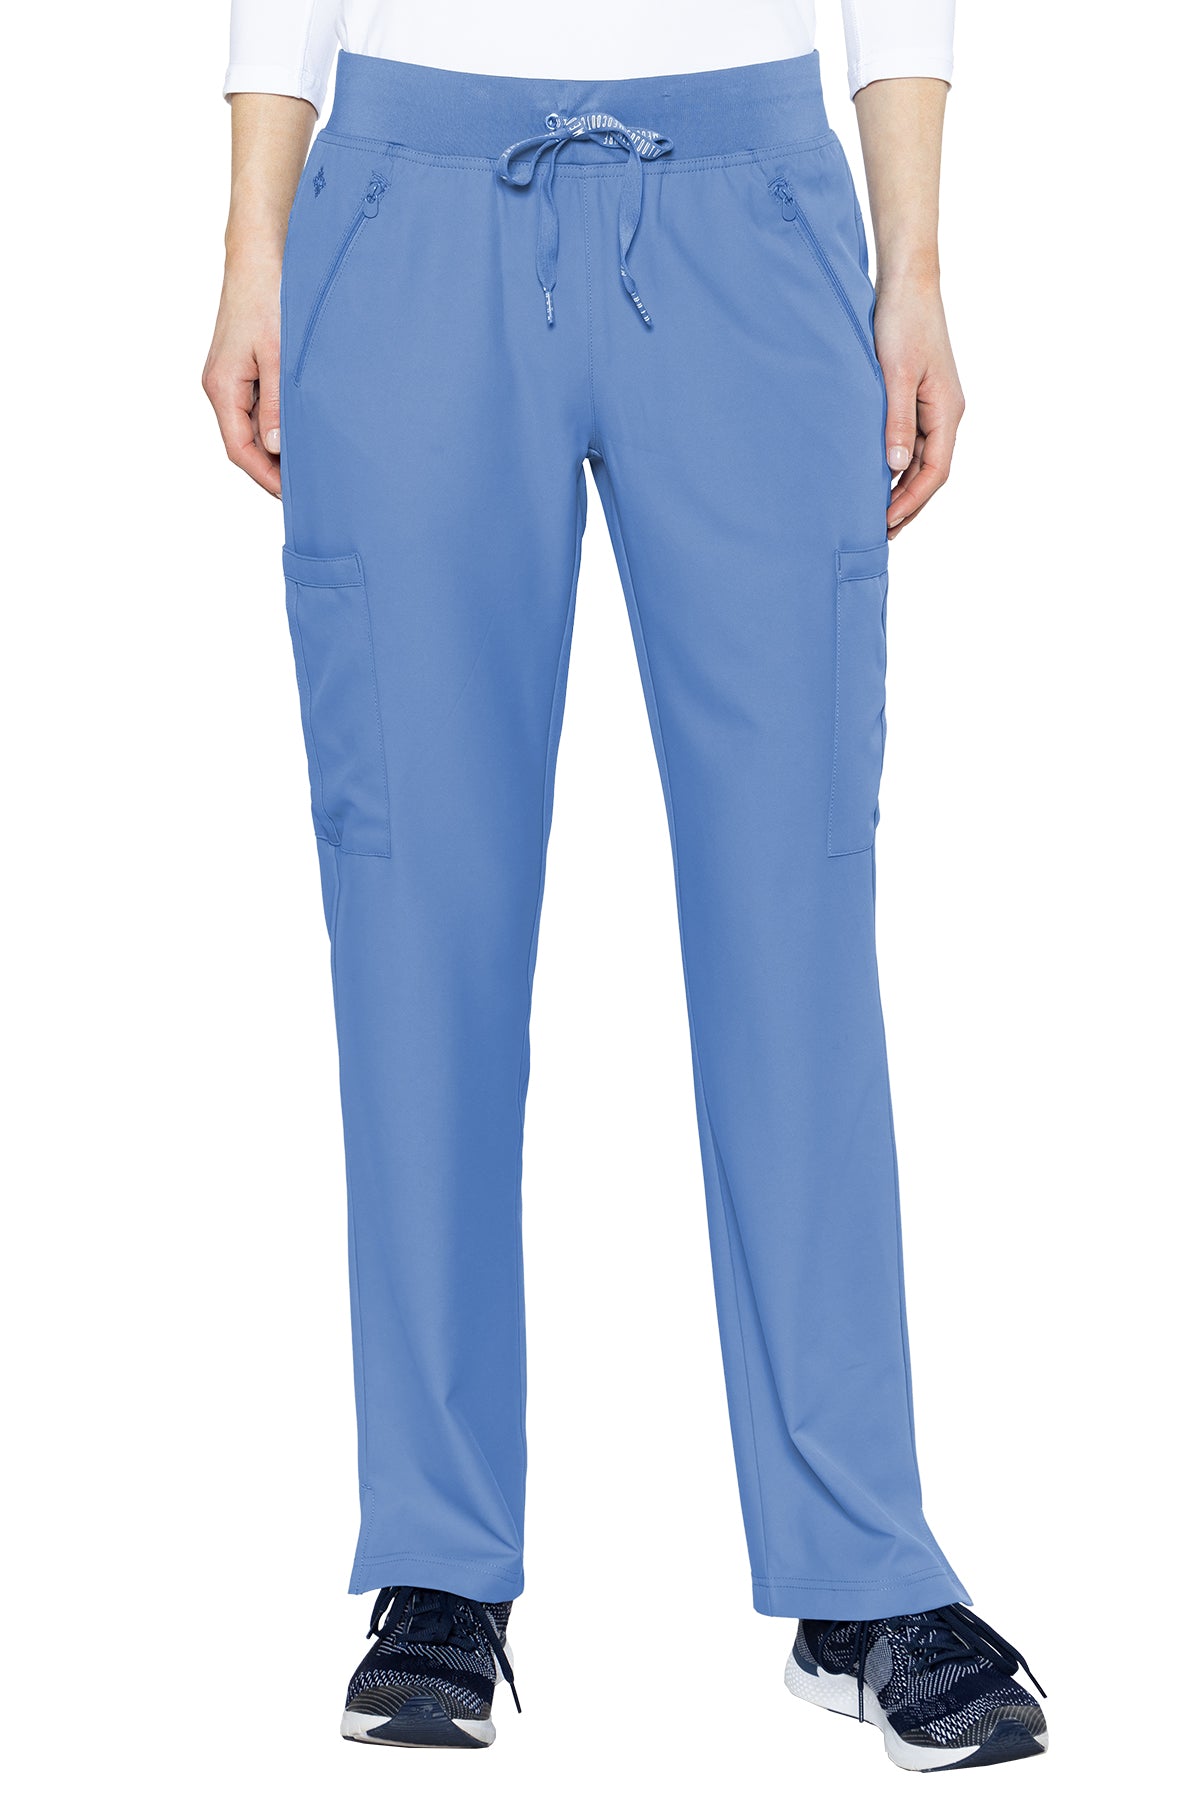 Med Couture Petite Scrub Pants Insight Zipper Pocket Pant in Ceil at Parker's Clothing and Shoes